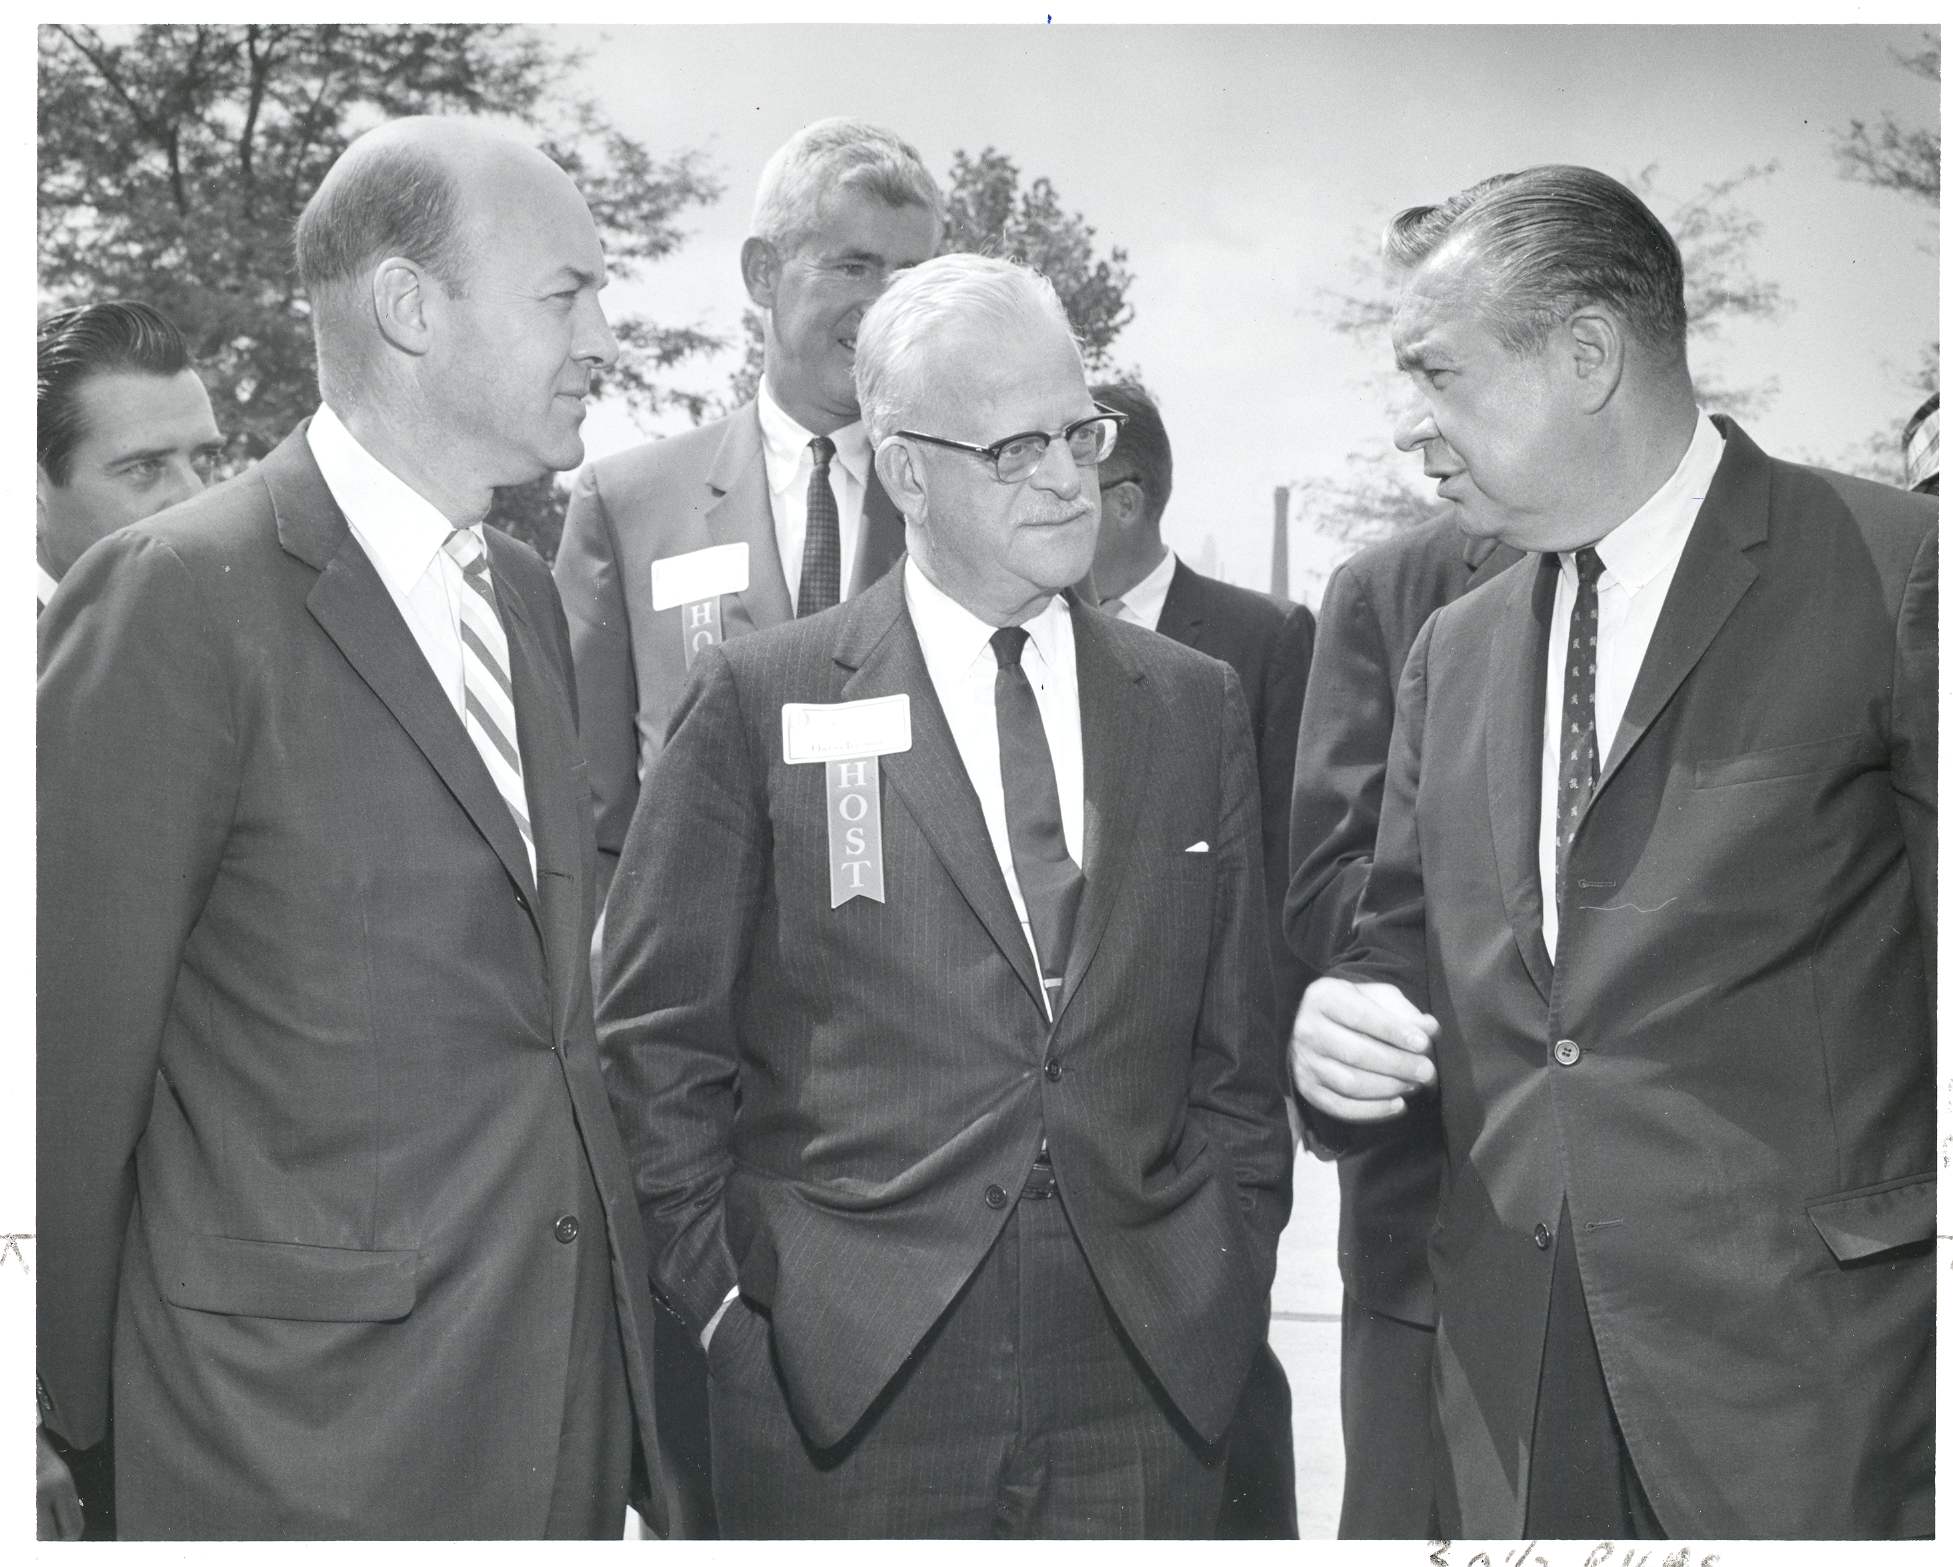 J. Preston Levis and Governor James Rhodes of Ohio in 1965